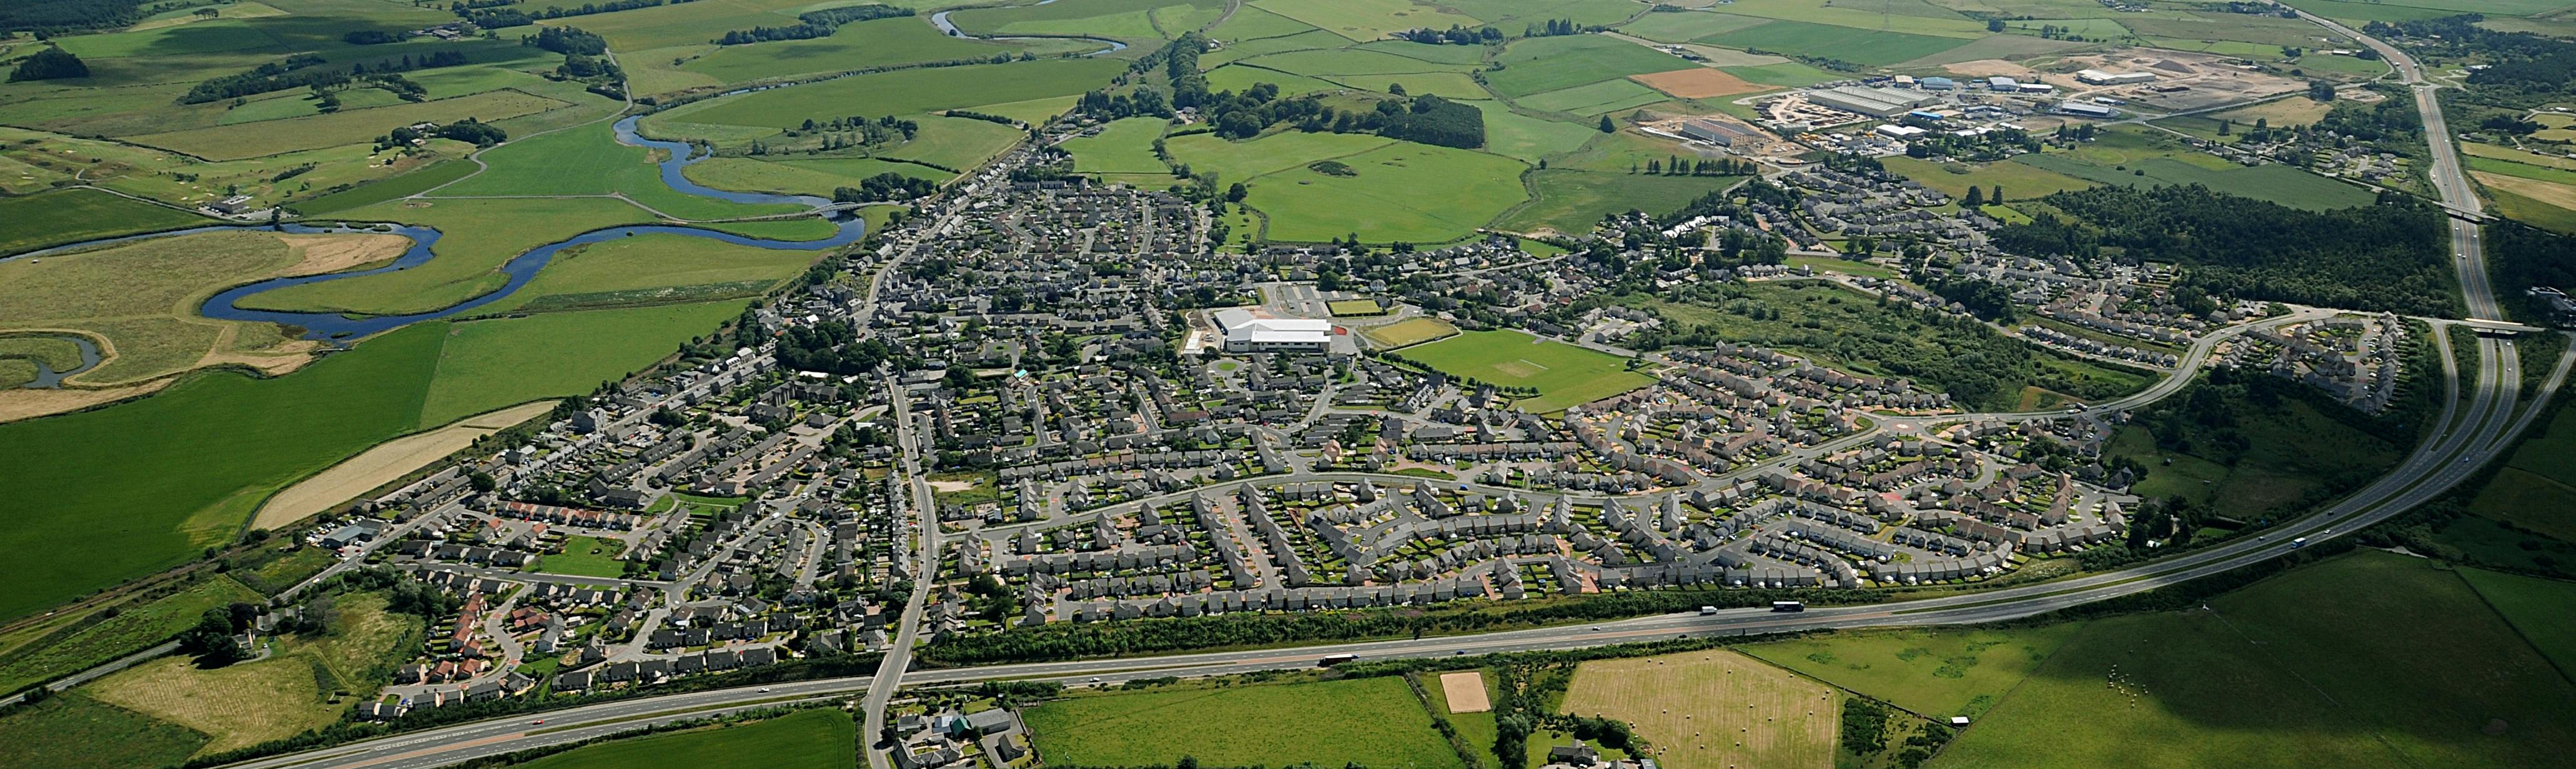 Image of Inverurie aierial